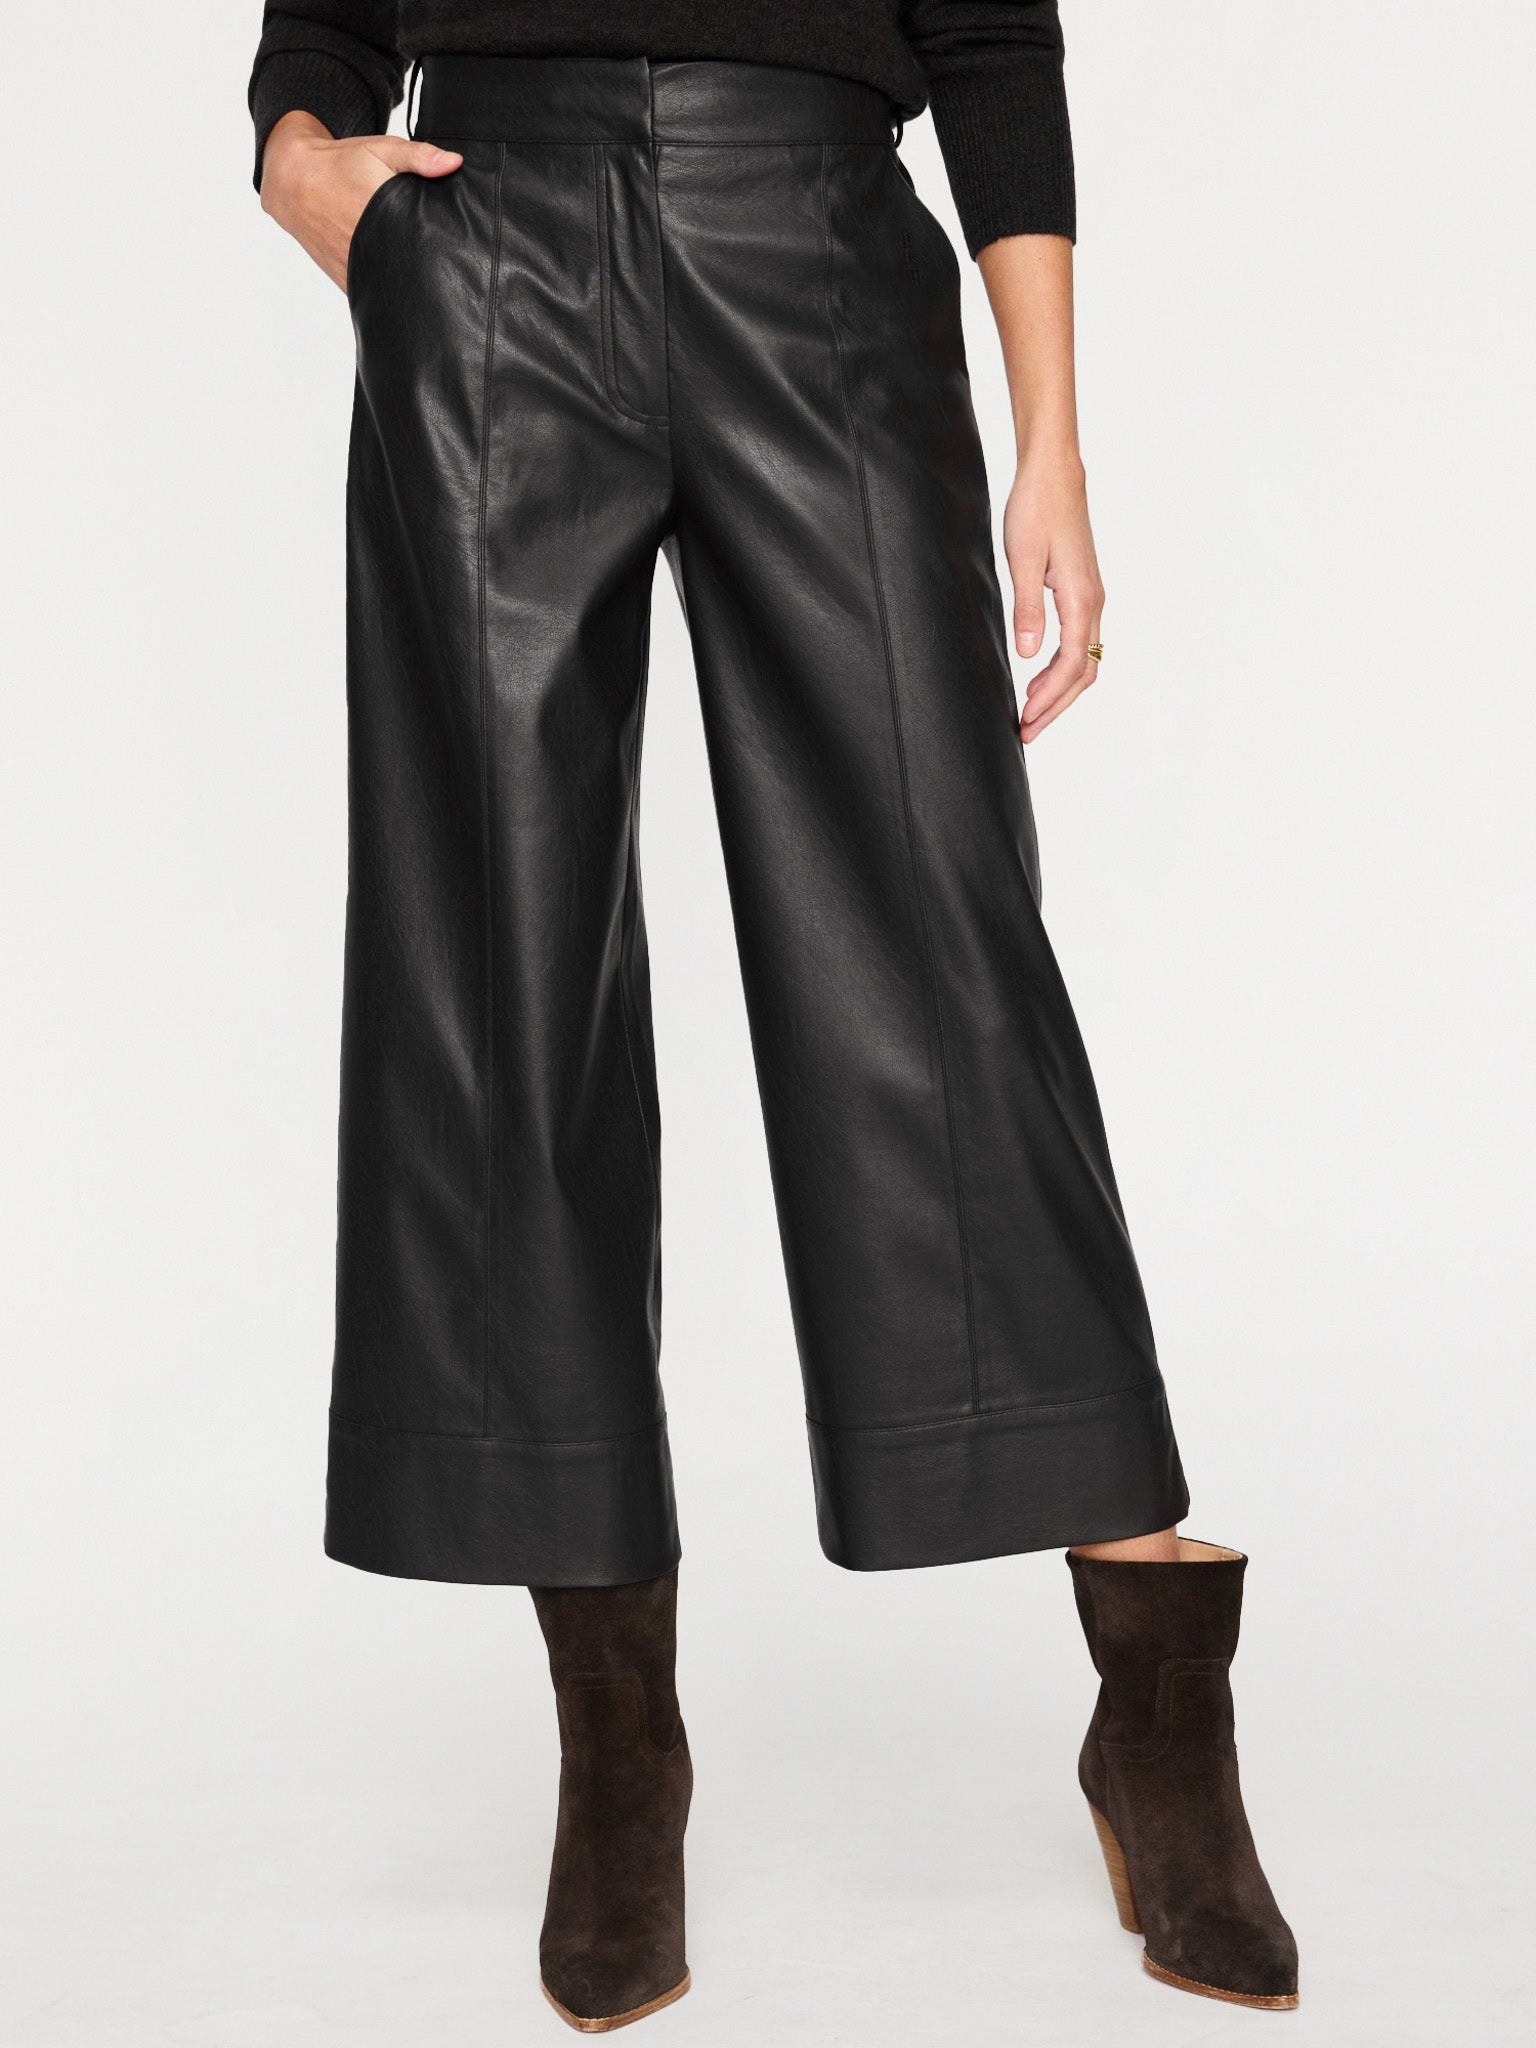 Odele black cropped wide-leg pant front view